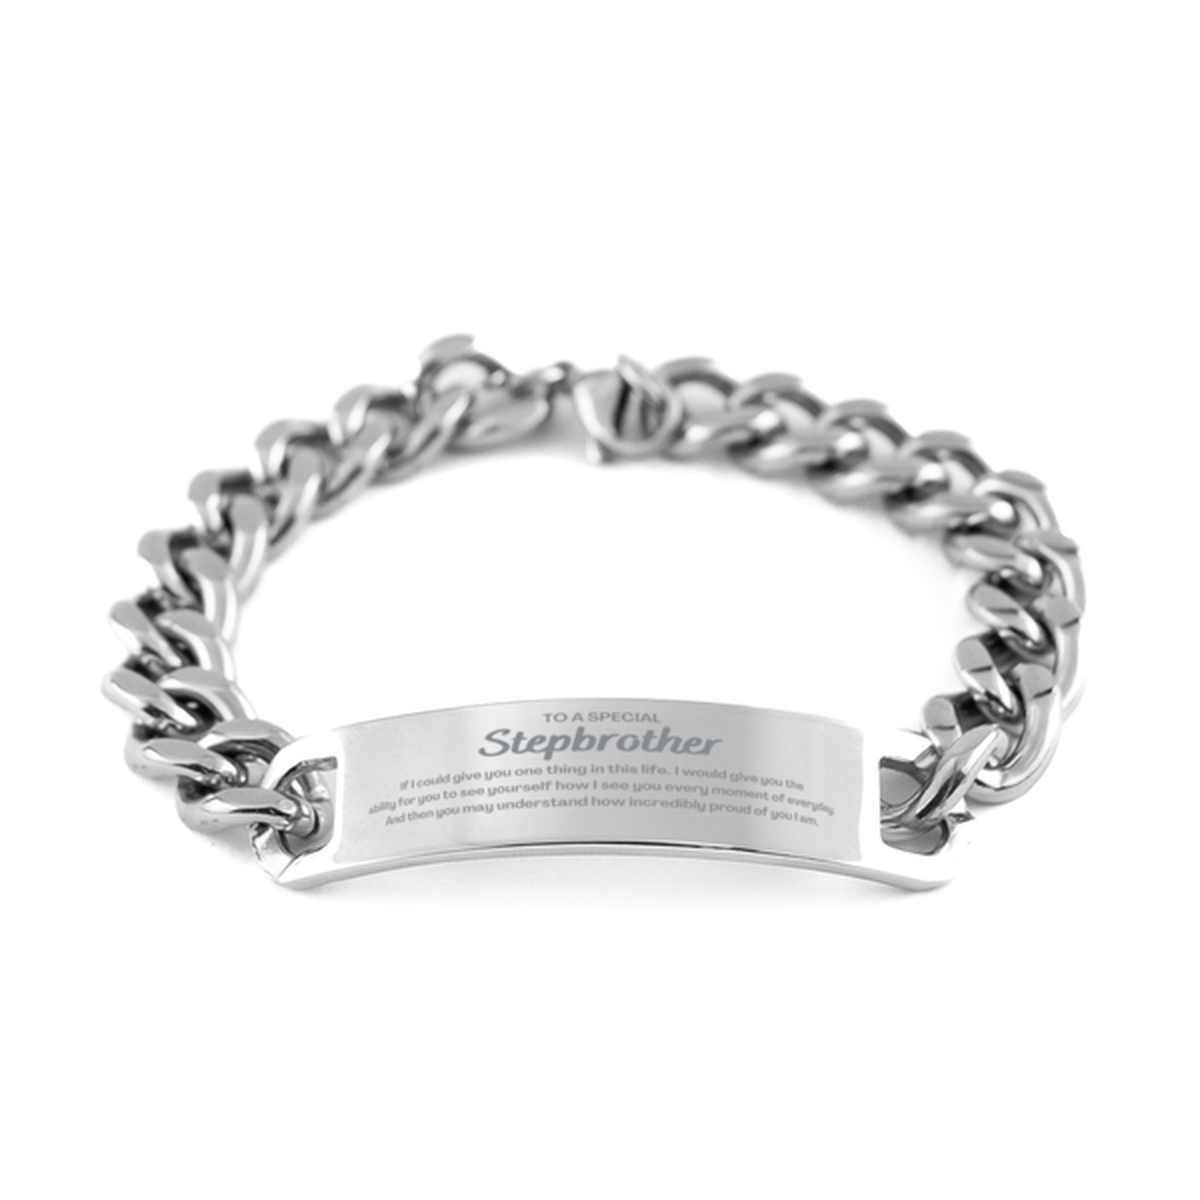 To My Stepbrother Cuban Chain Stainless Steel Bracelet, Gifts For Stepbrother Engraved, Inspirational Gifts for Christmas Birthday, Epic Gifts for Stepbrother To A Special Stepbrother how incredibly proud of you I am